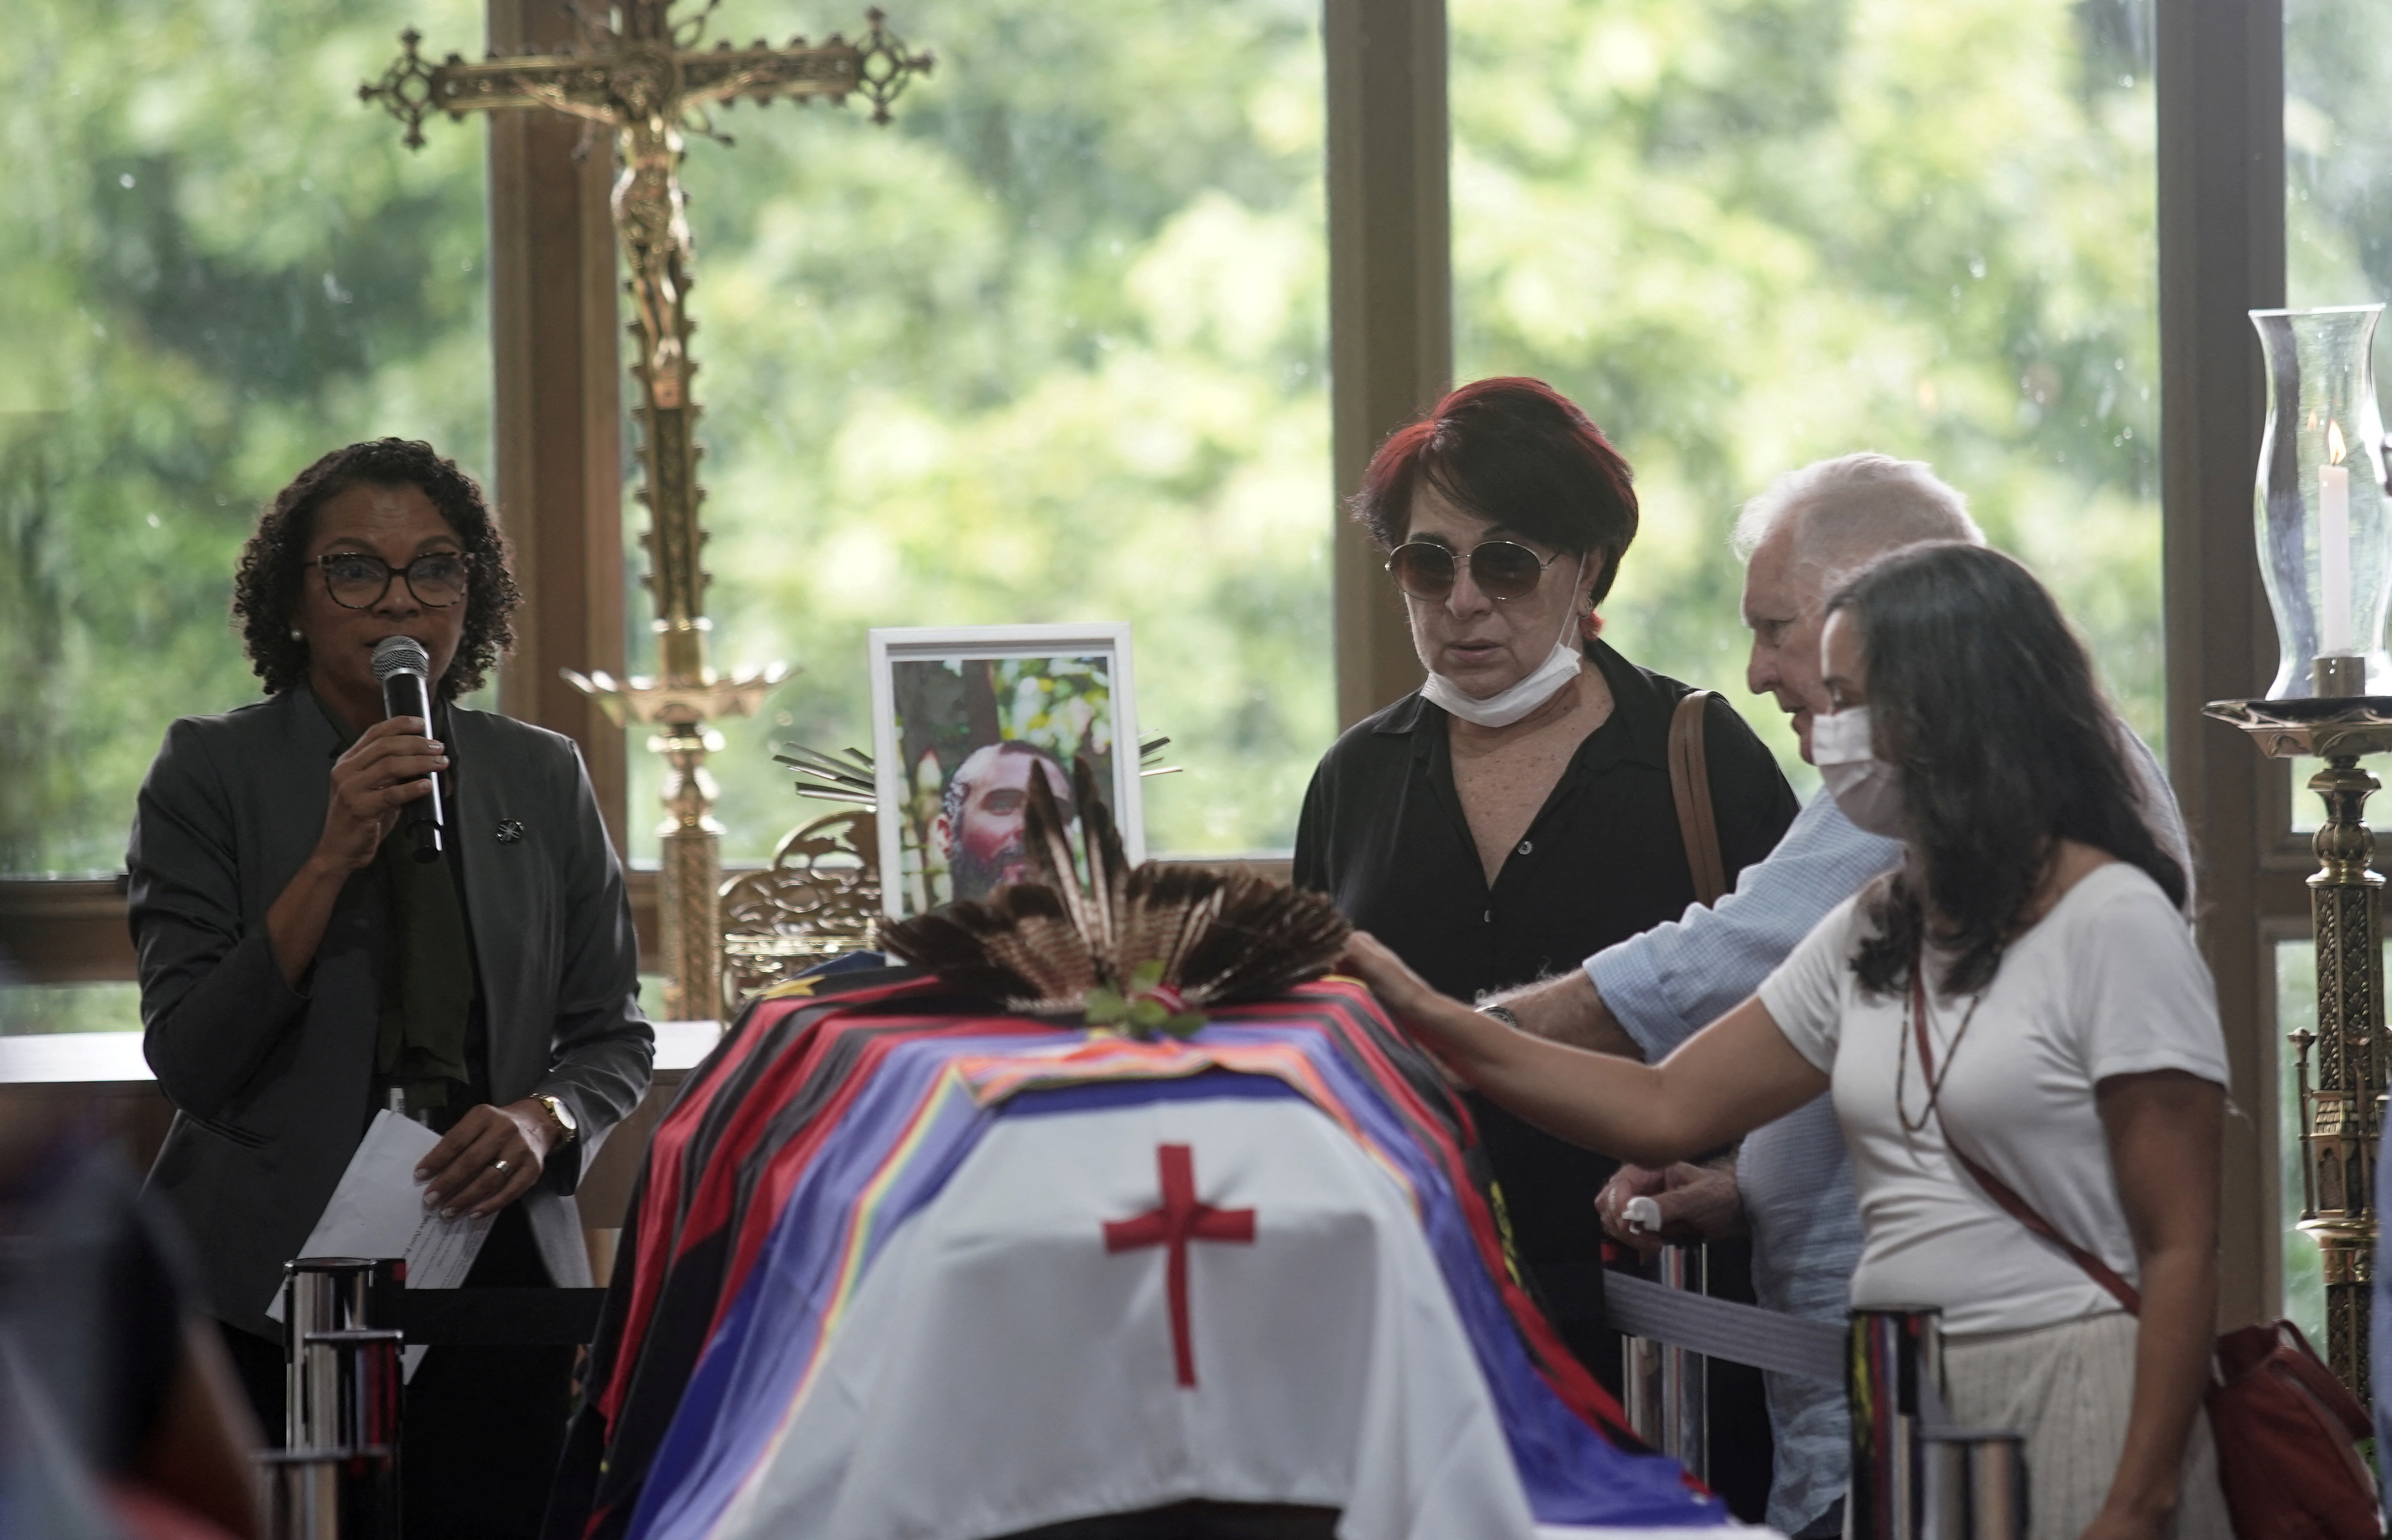 Maria de Graca and Max Pereira, parents of indigenous expert Bruno Pereira mourn during their son’s funeral at the cemetery in Recife